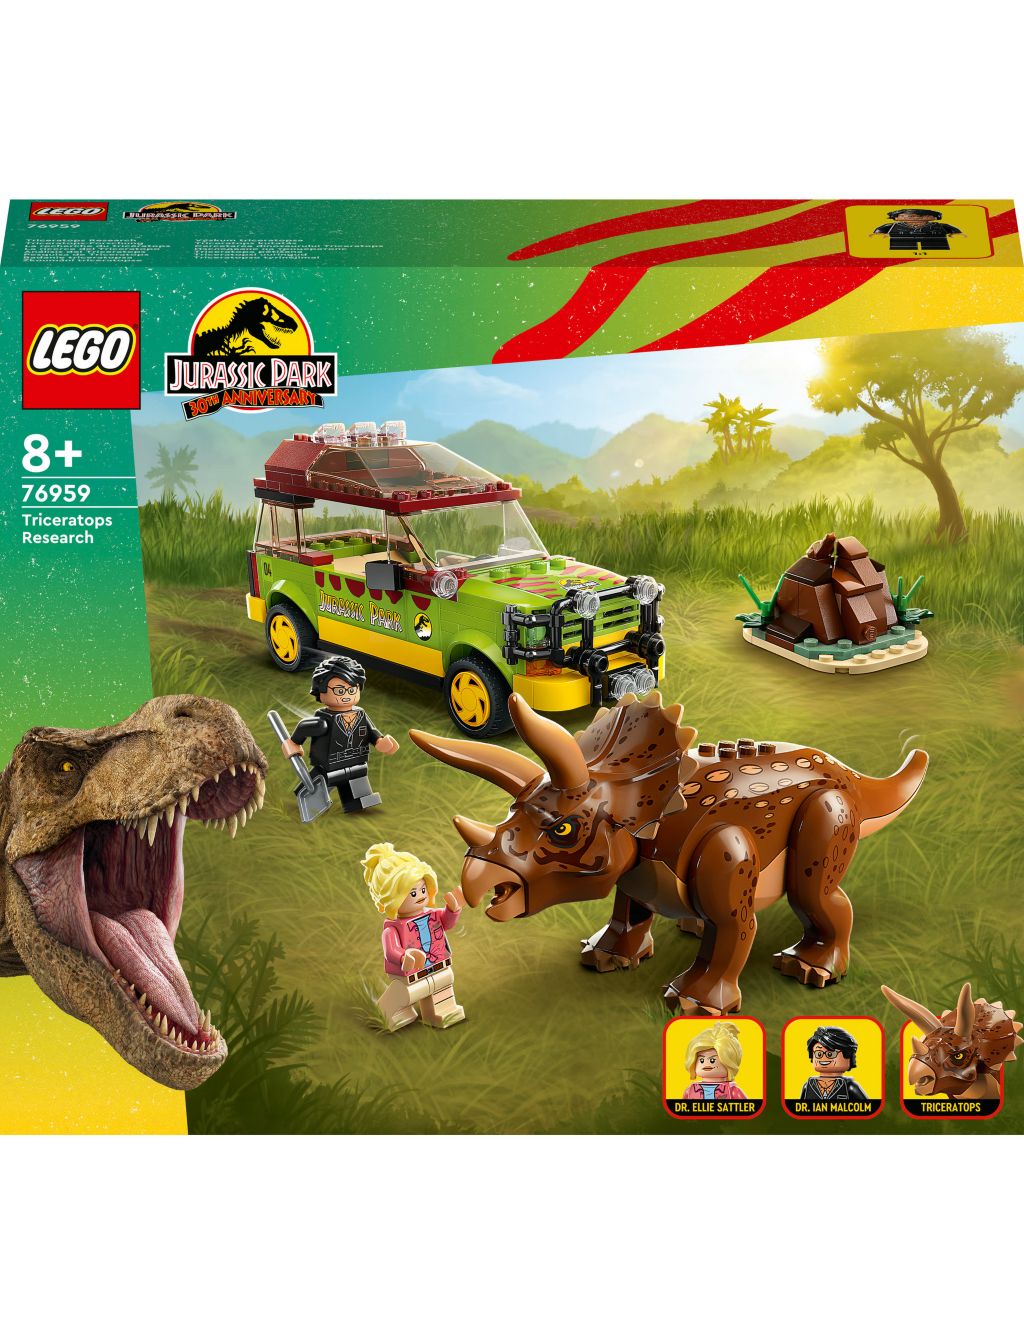 LEGO Jurassic Park Triceratops Research Set (8+ Yrs) image 3